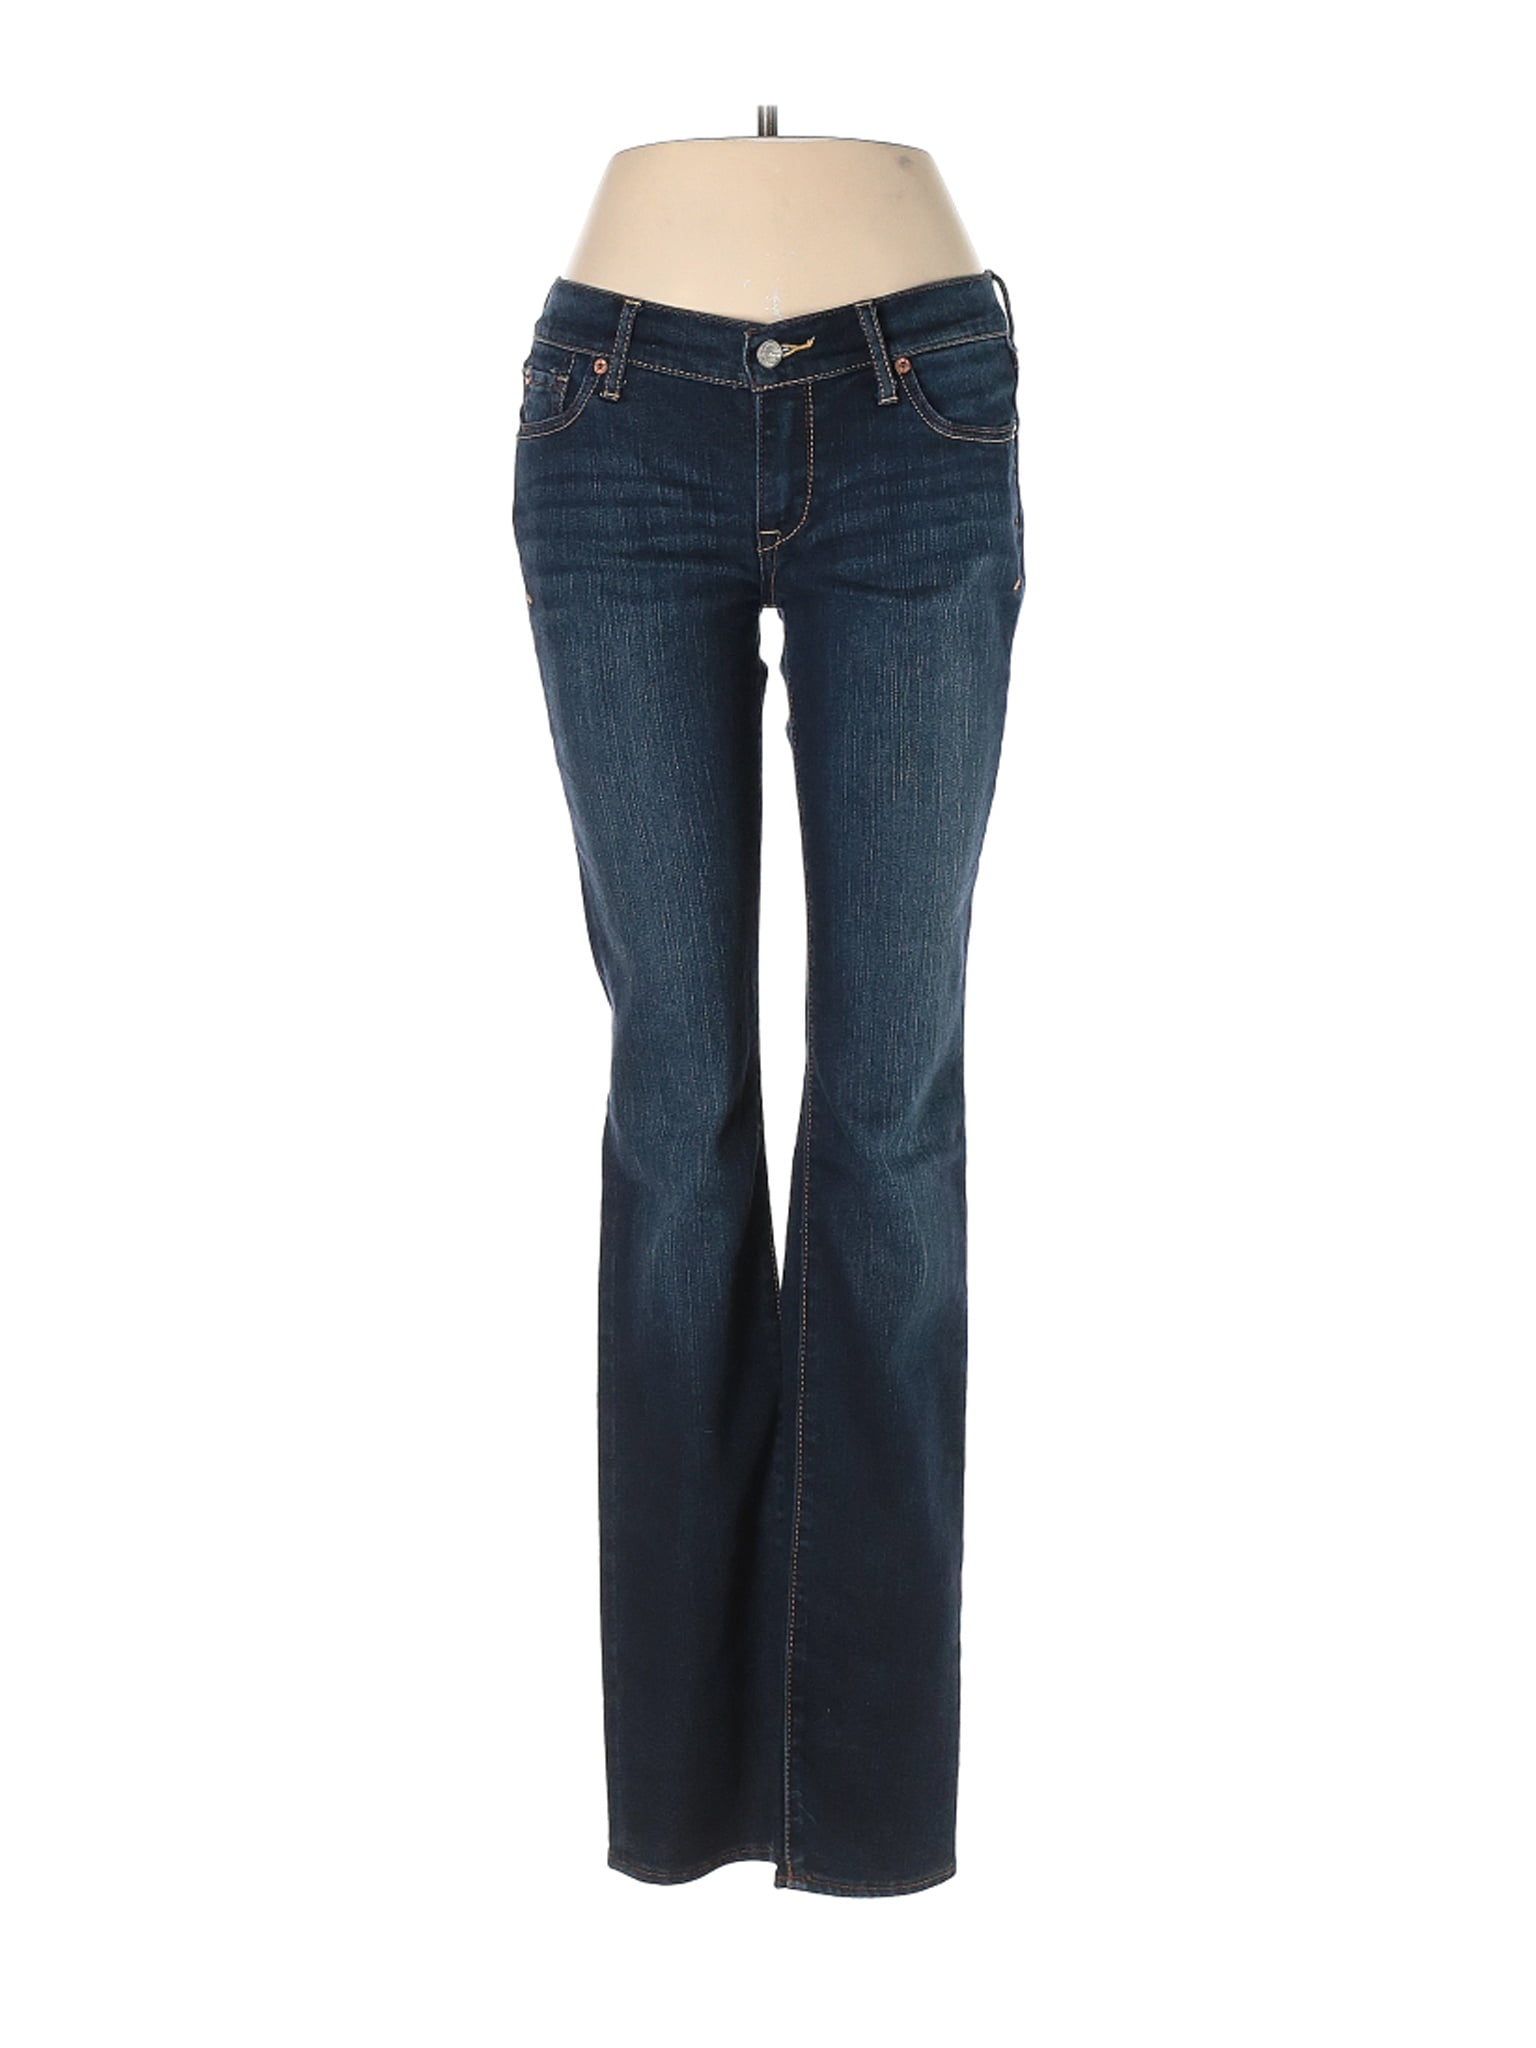 Ruehl No. 925 - Pre-Owned Ruehl No. 925 Women's Size 26W Jeans ...